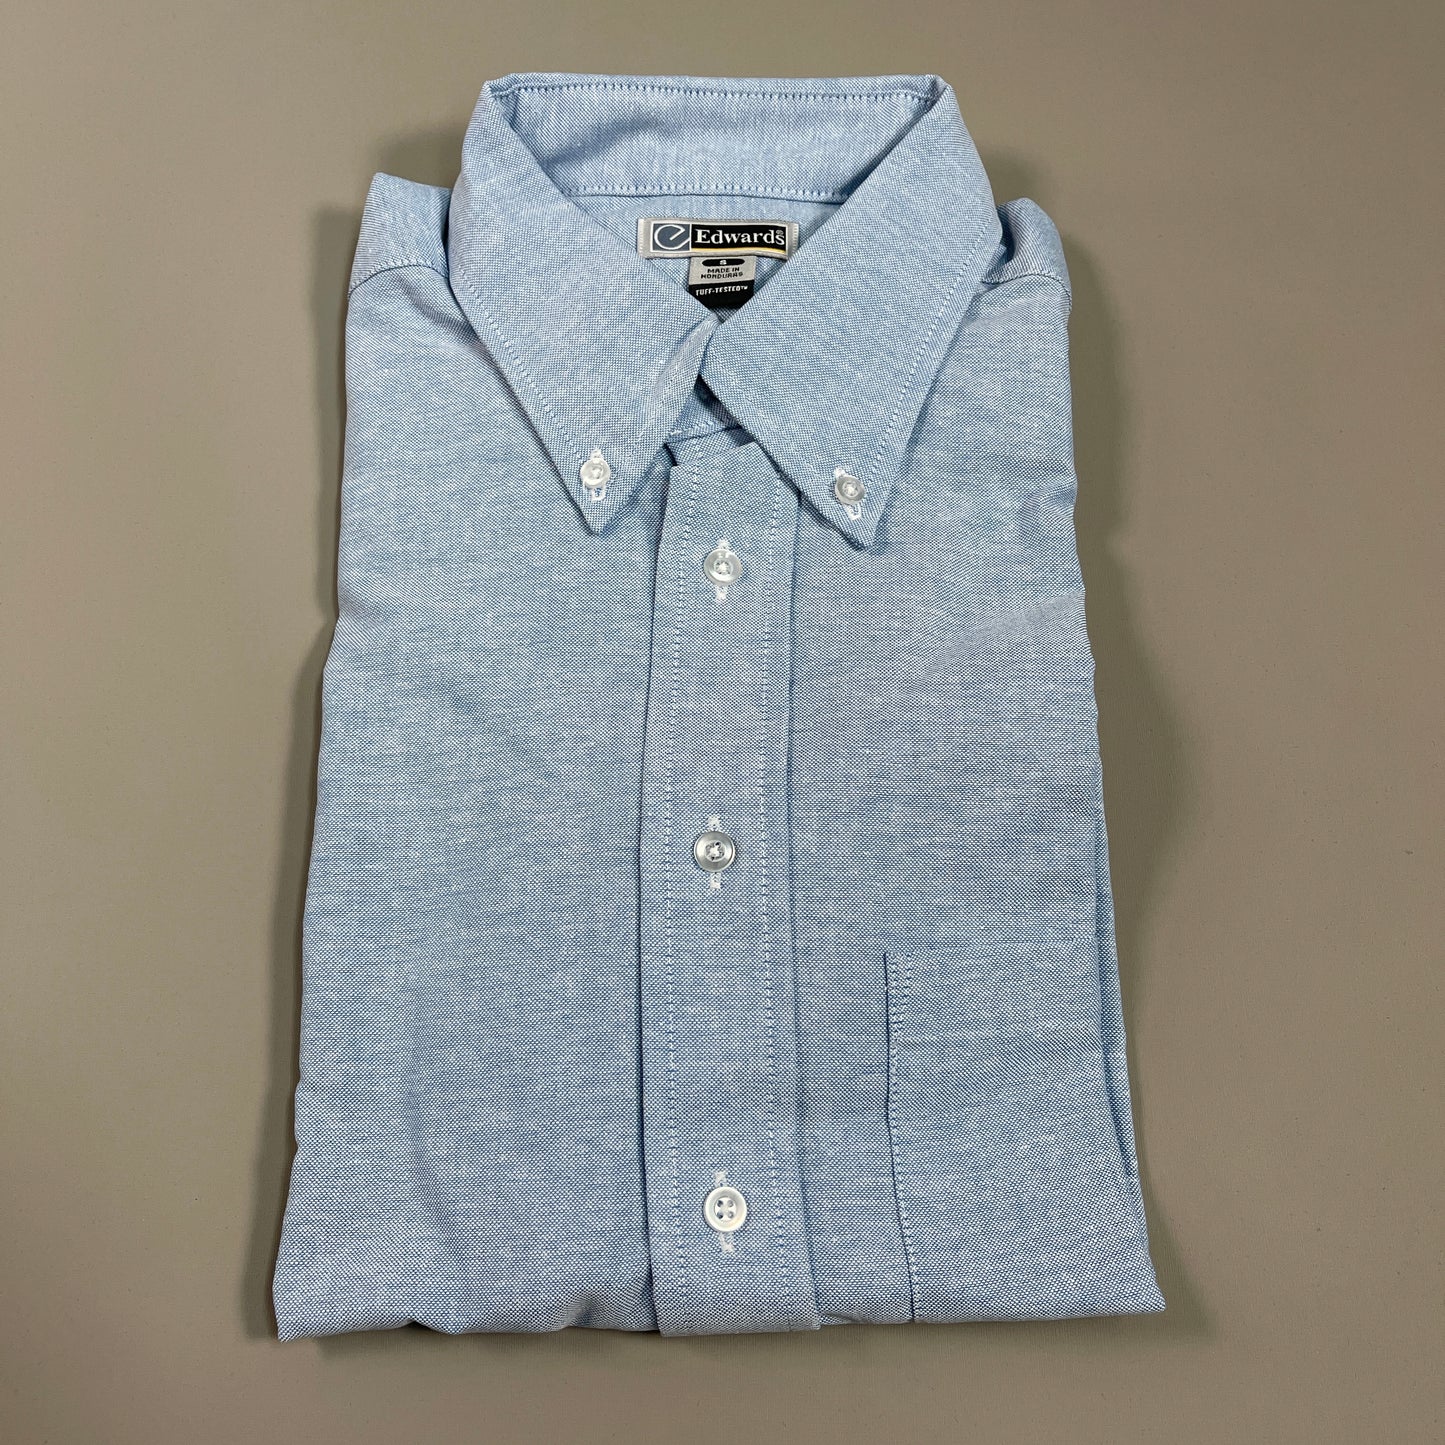 EDWARDS Tuff Tested Short Sleeve Button Up Oxford Shirt Men's Top Sz S Blue (New)